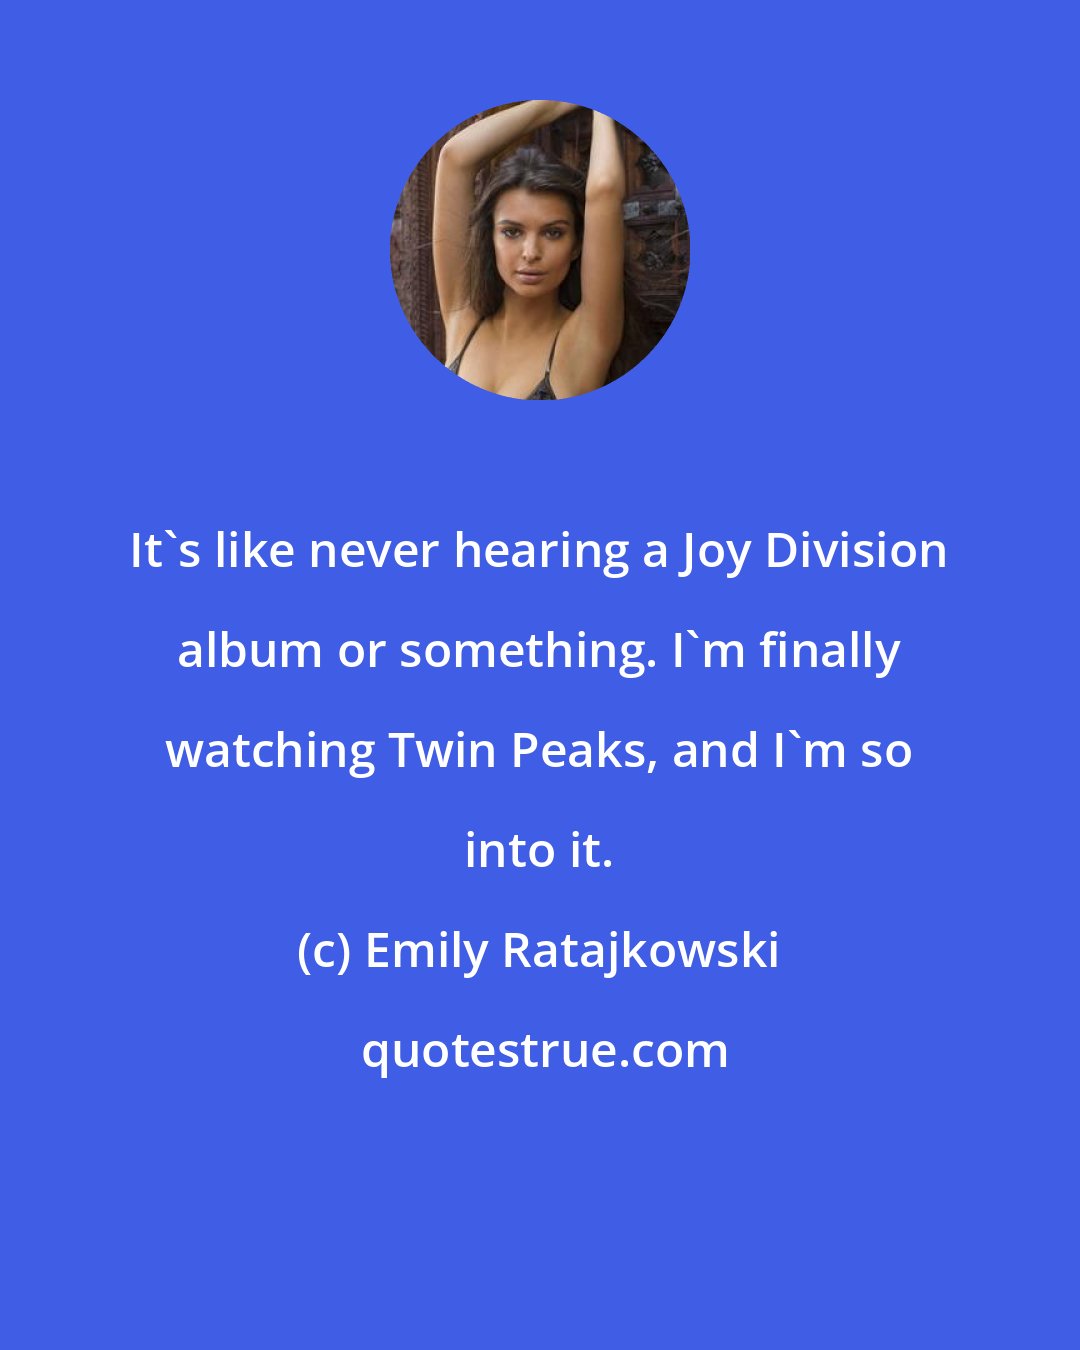 Emily Ratajkowski: It's like never hearing a Joy Division album or something. I'm finally watching Twin Peaks, and I'm so into it.